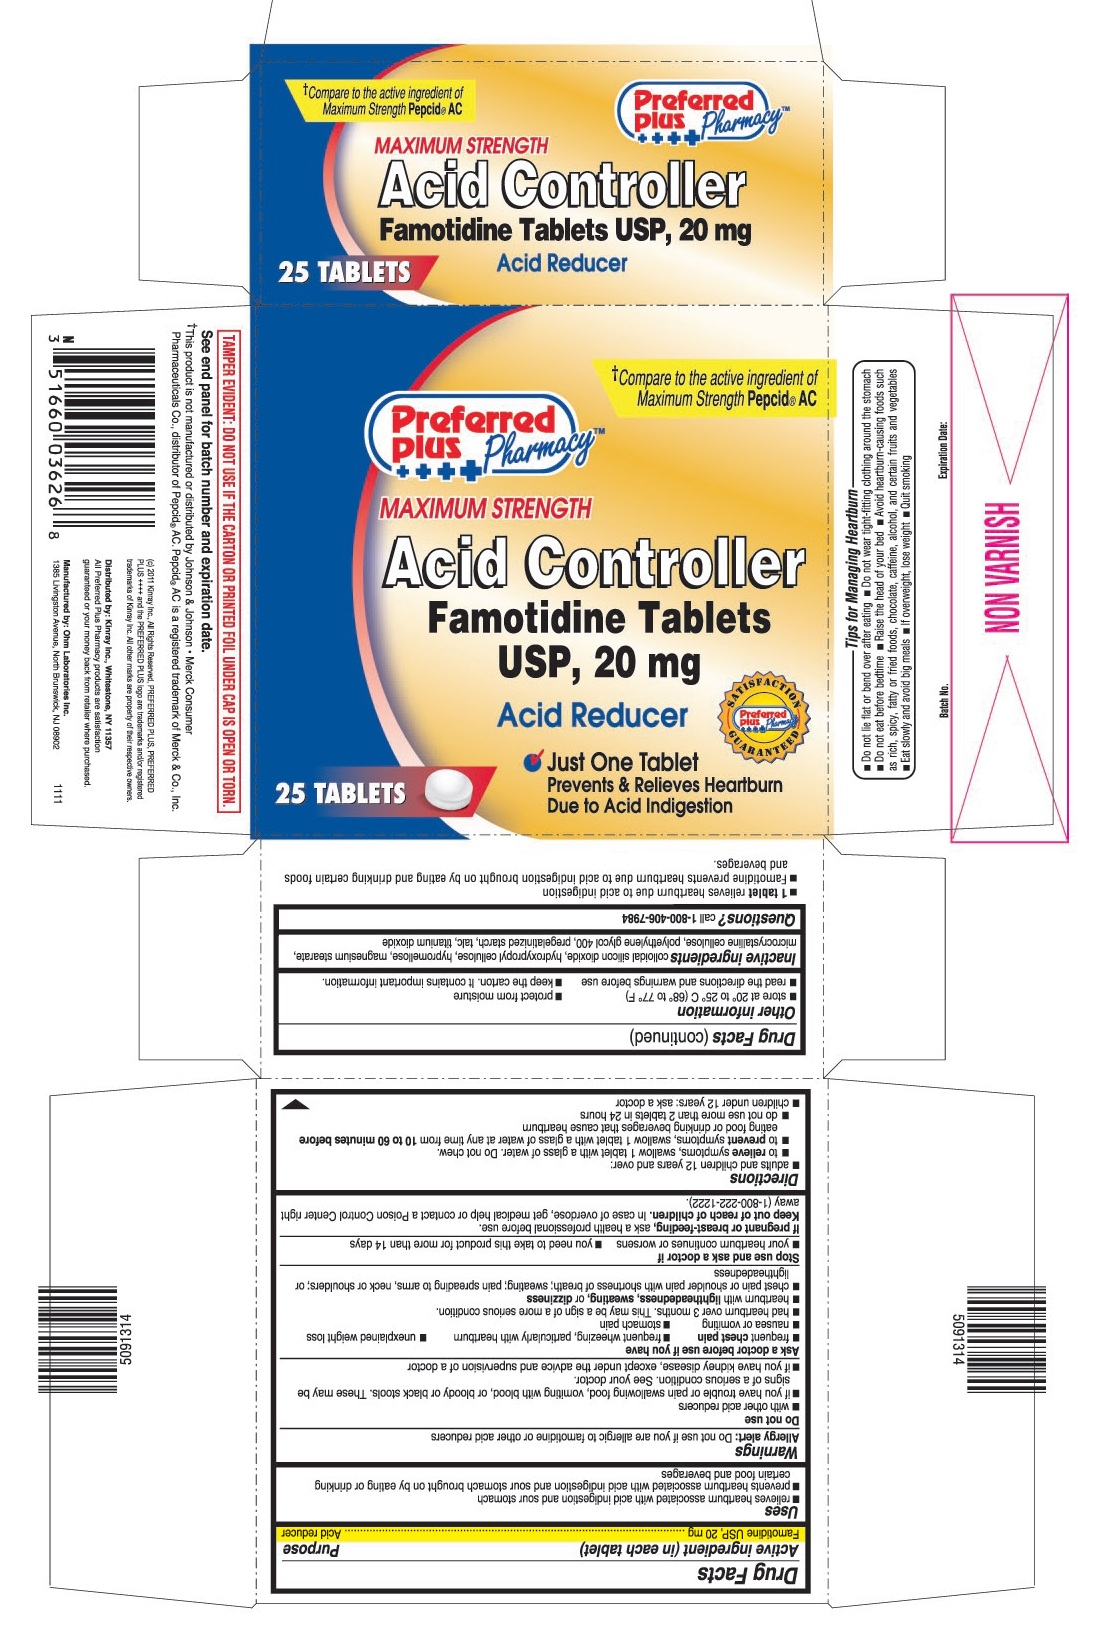 This is the 25 count blister carton label for Preferred Plus Famotidine tablets USP, 20 mg.